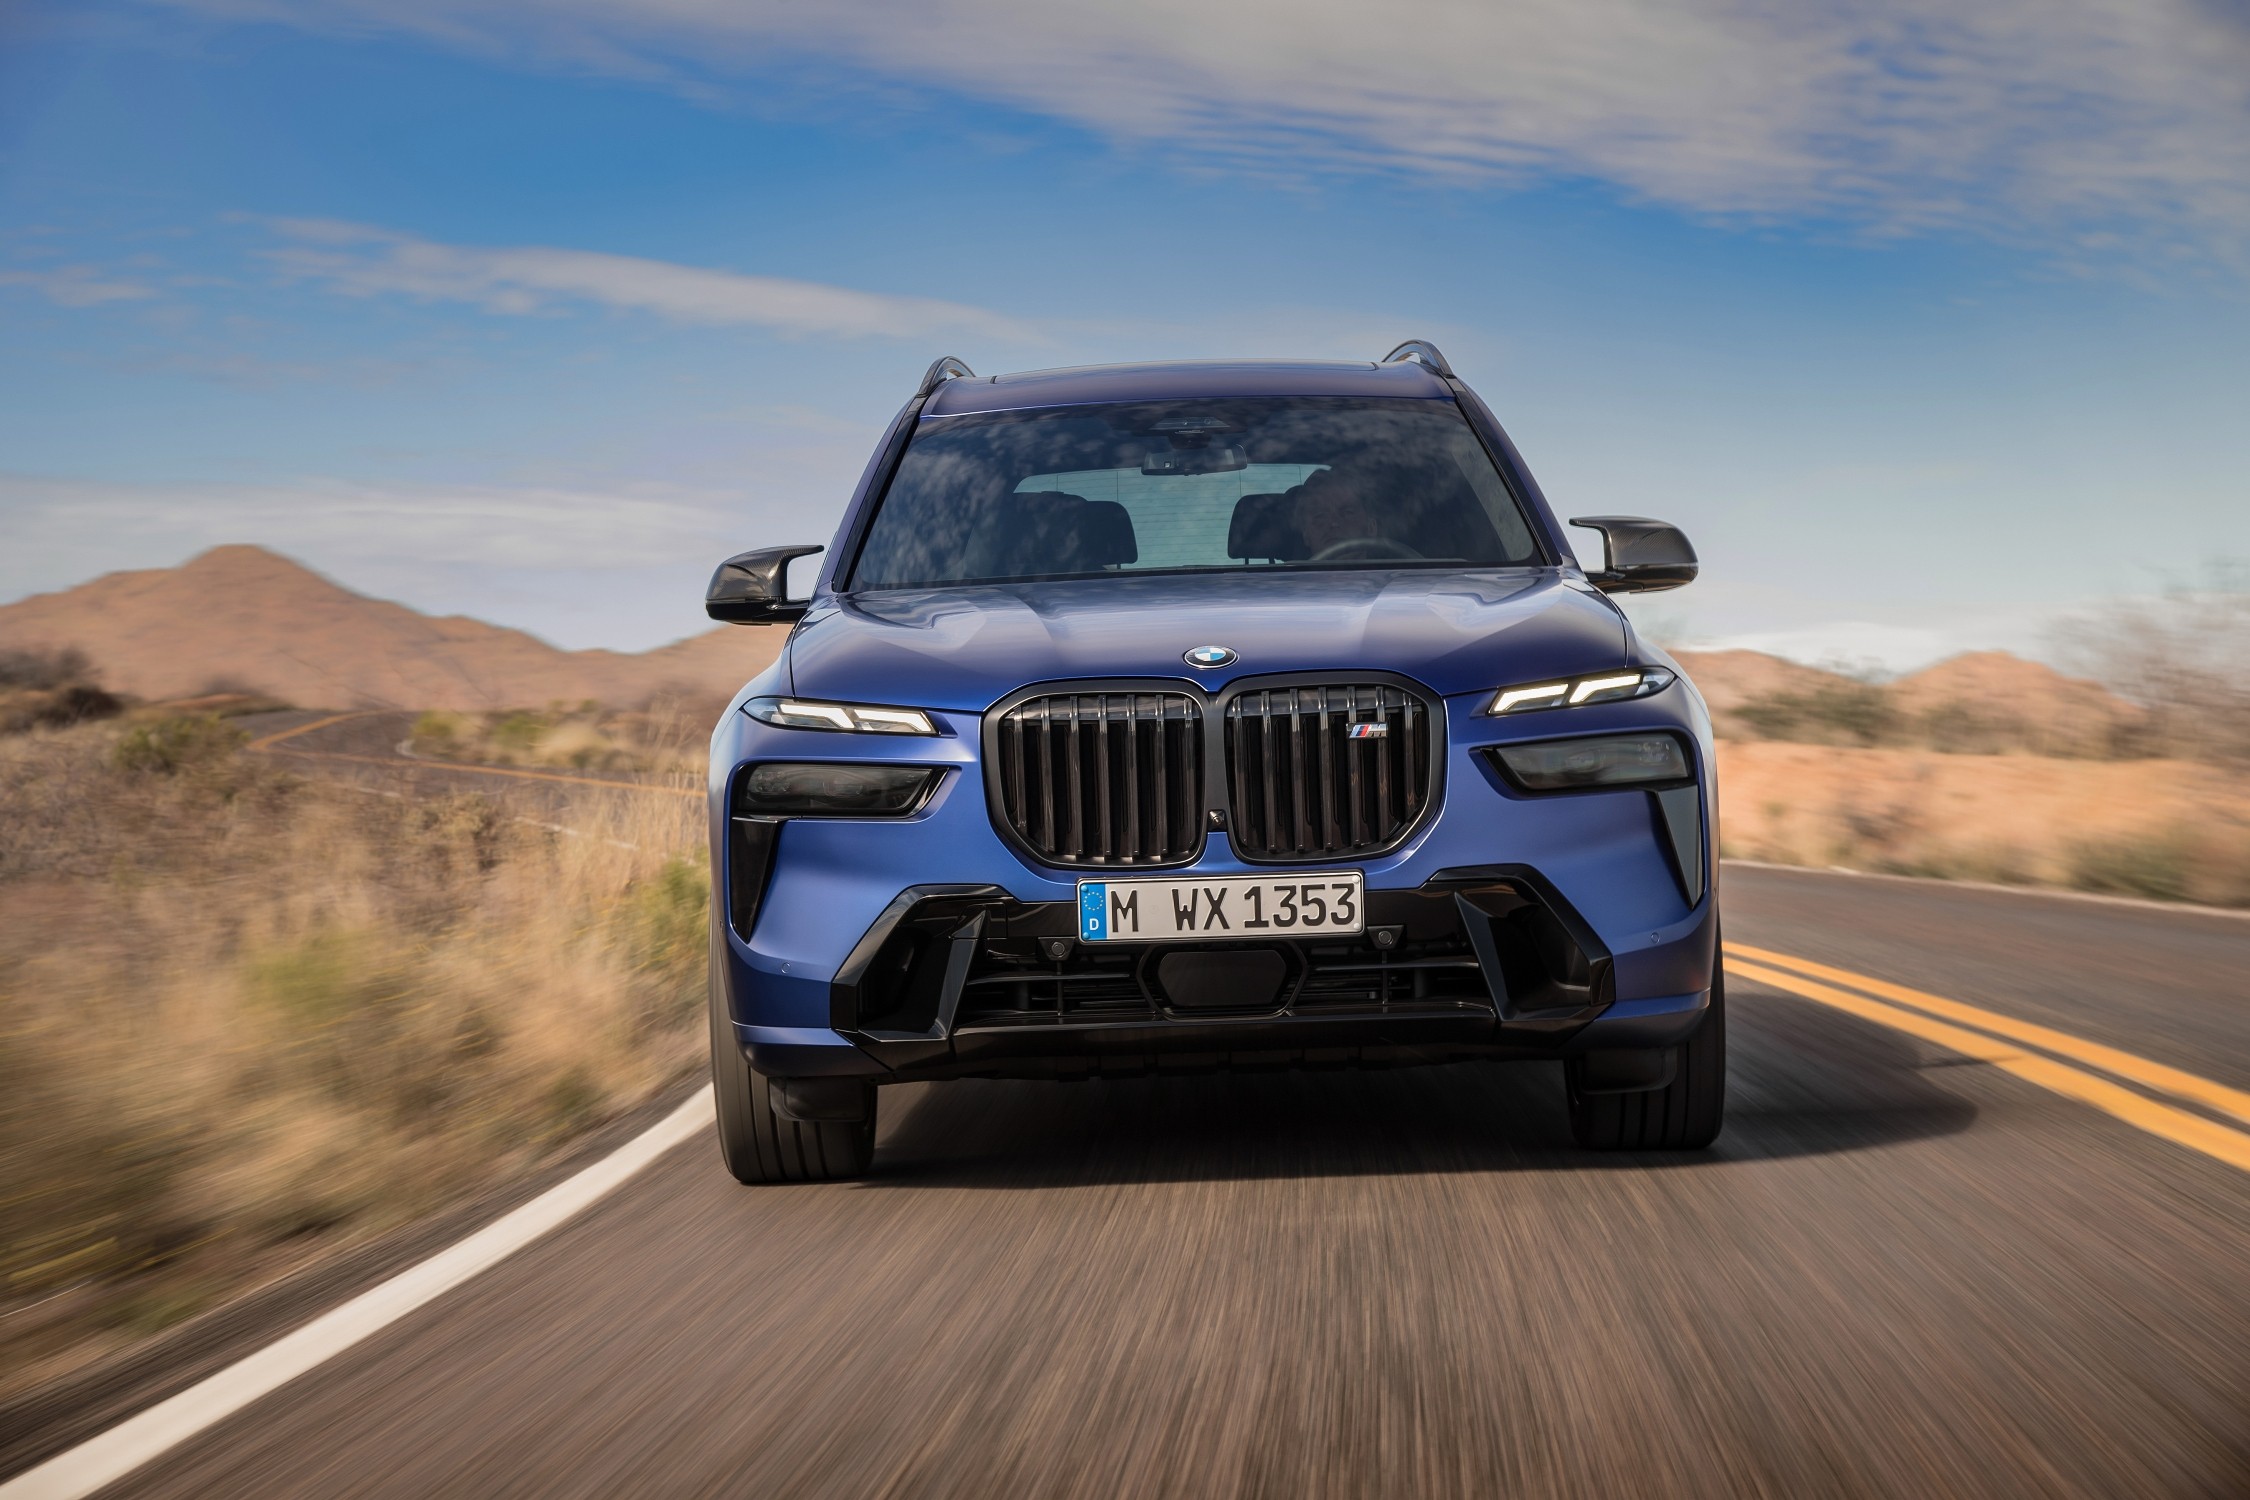 The new BMW X7 comes with a host of changes to the exterior and interior of the cabin.